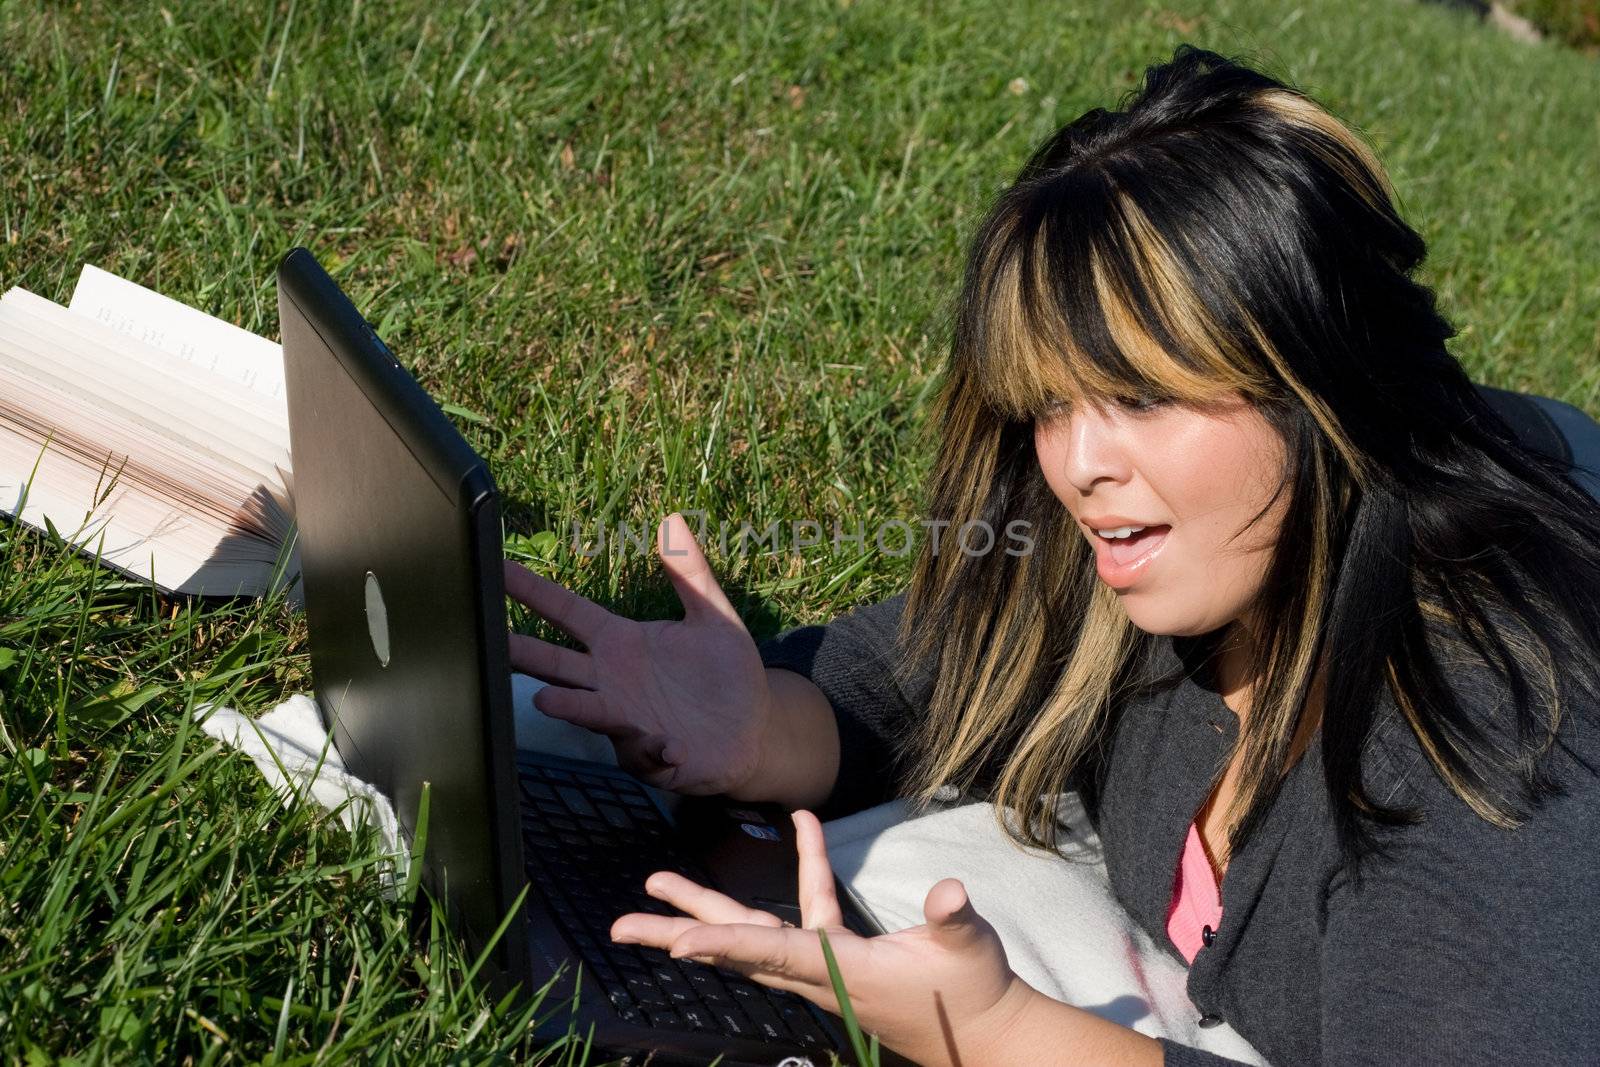 A young student using her laptop computer while laying in the grass on a nice day.